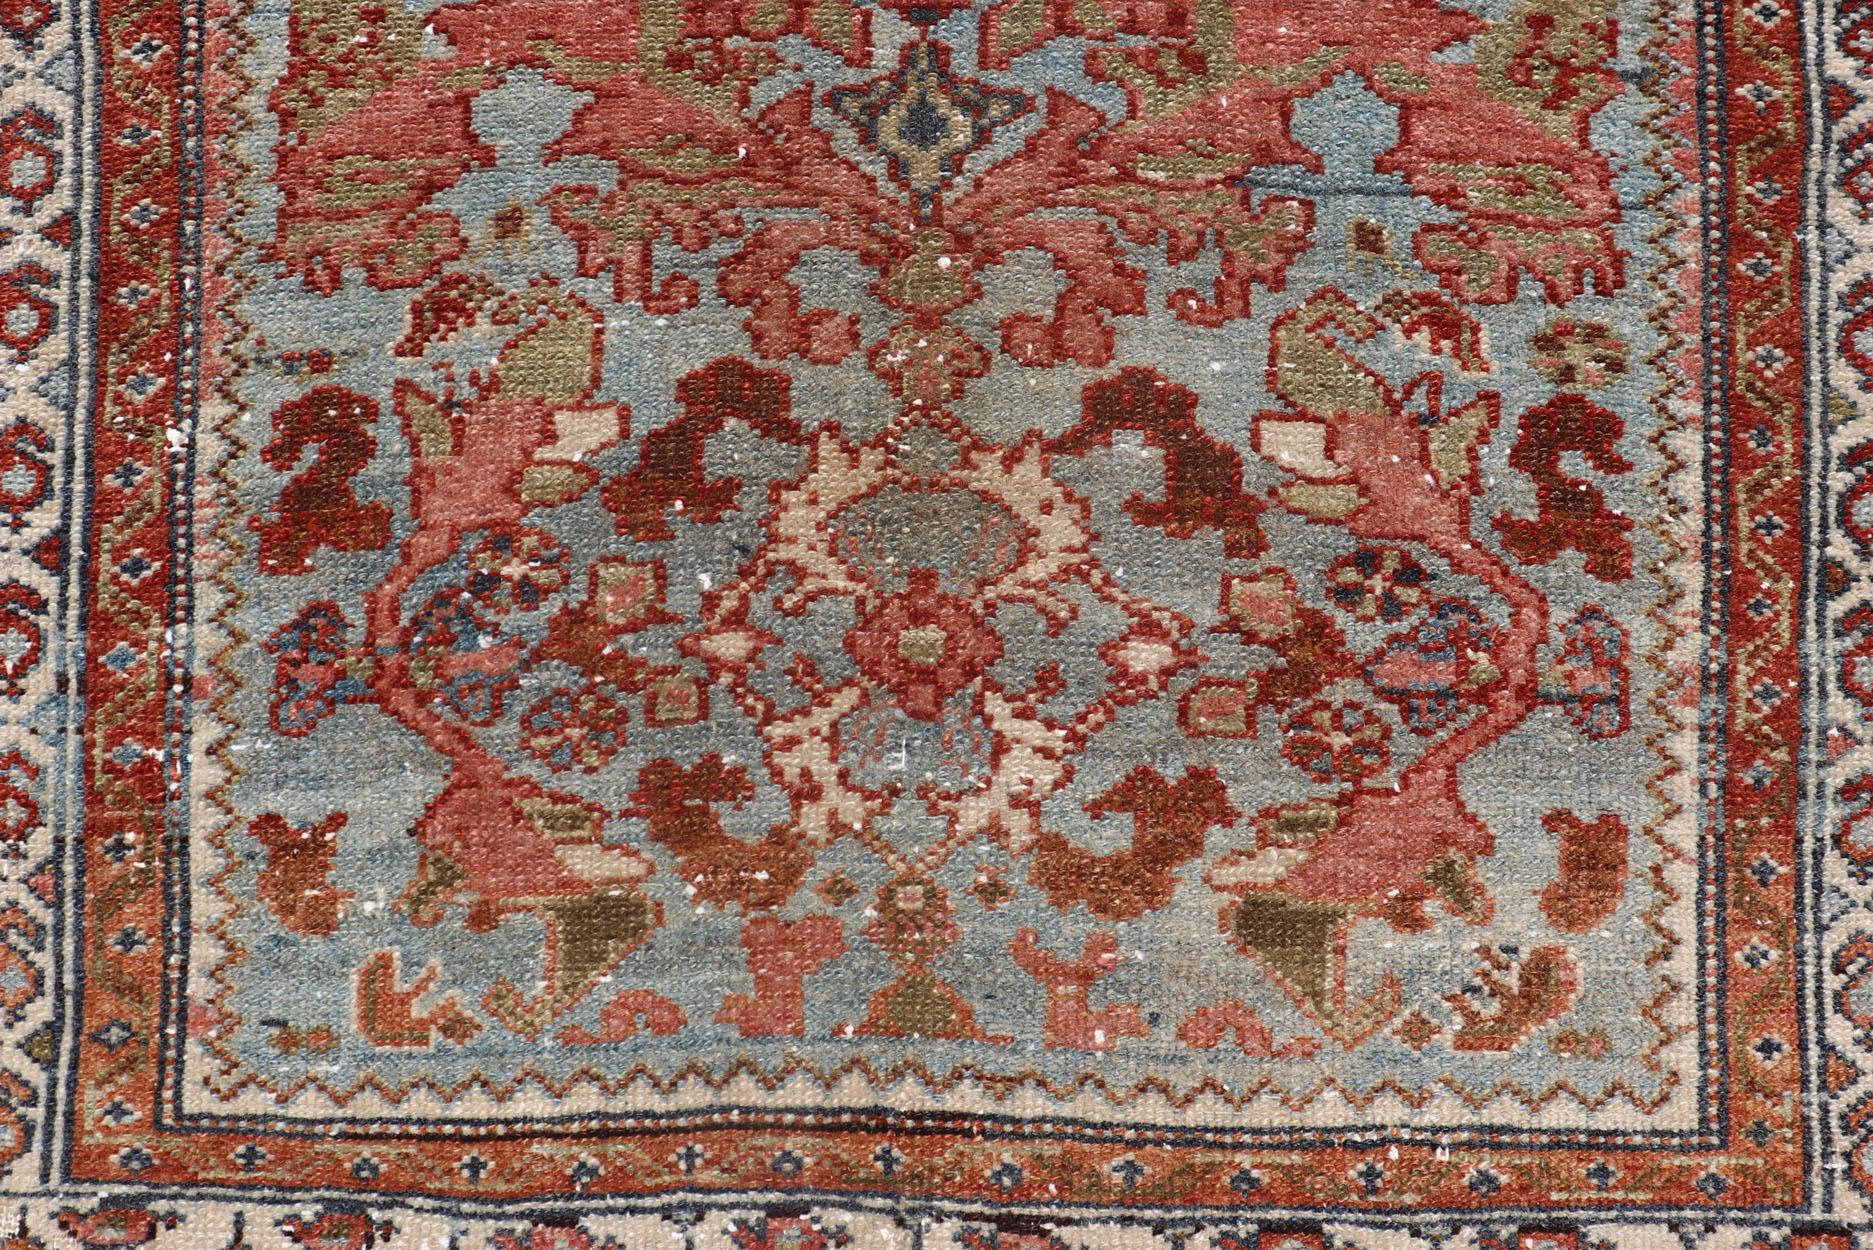 20th Century Antique Persian Malayer Rug with a Blue Field and Stylized Floral Design